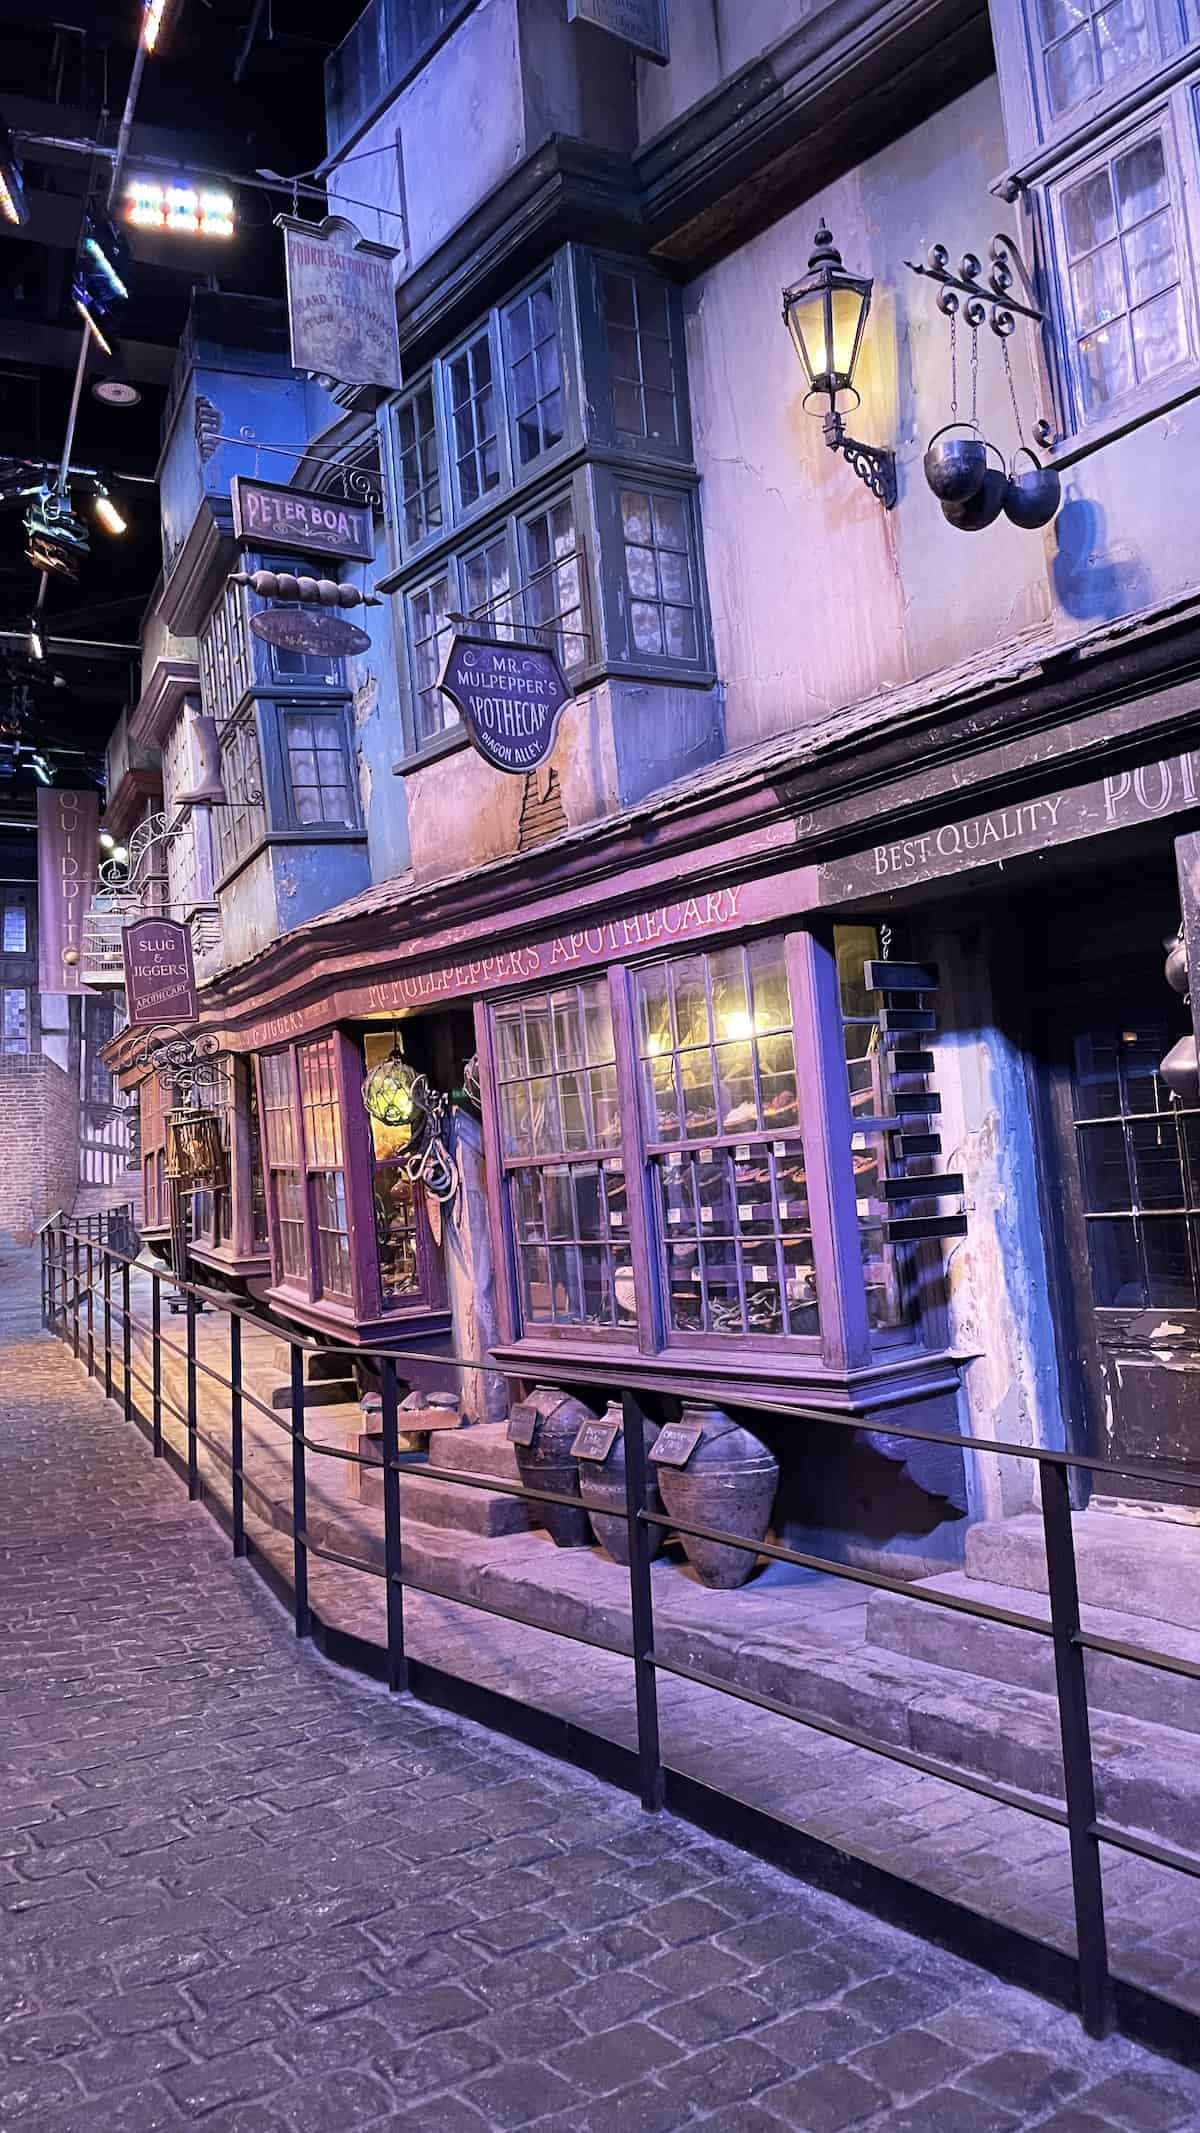 Warner Bros Studios Tour London - The Making of Harry Potter Review